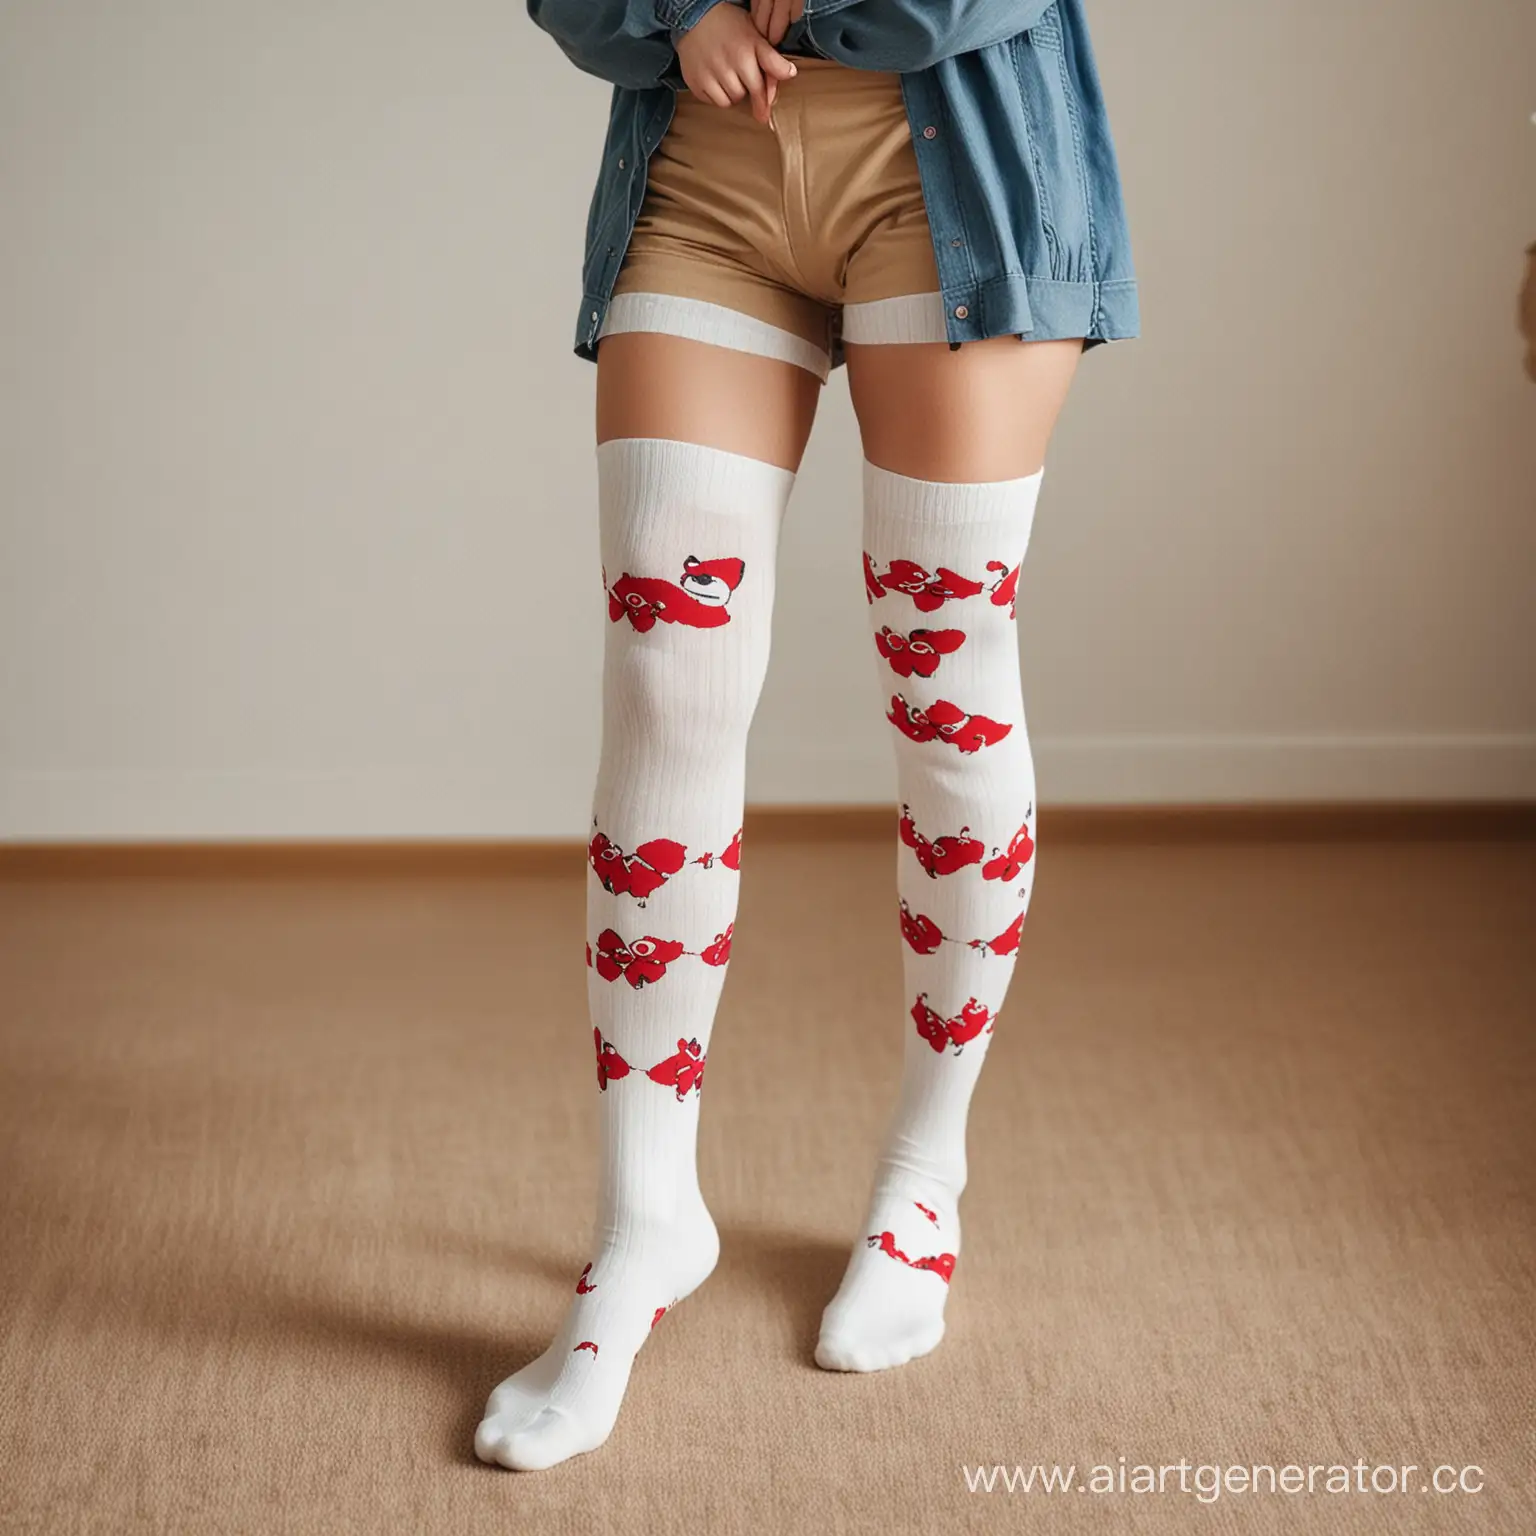 A full-length girl in thigh-high socks with a design